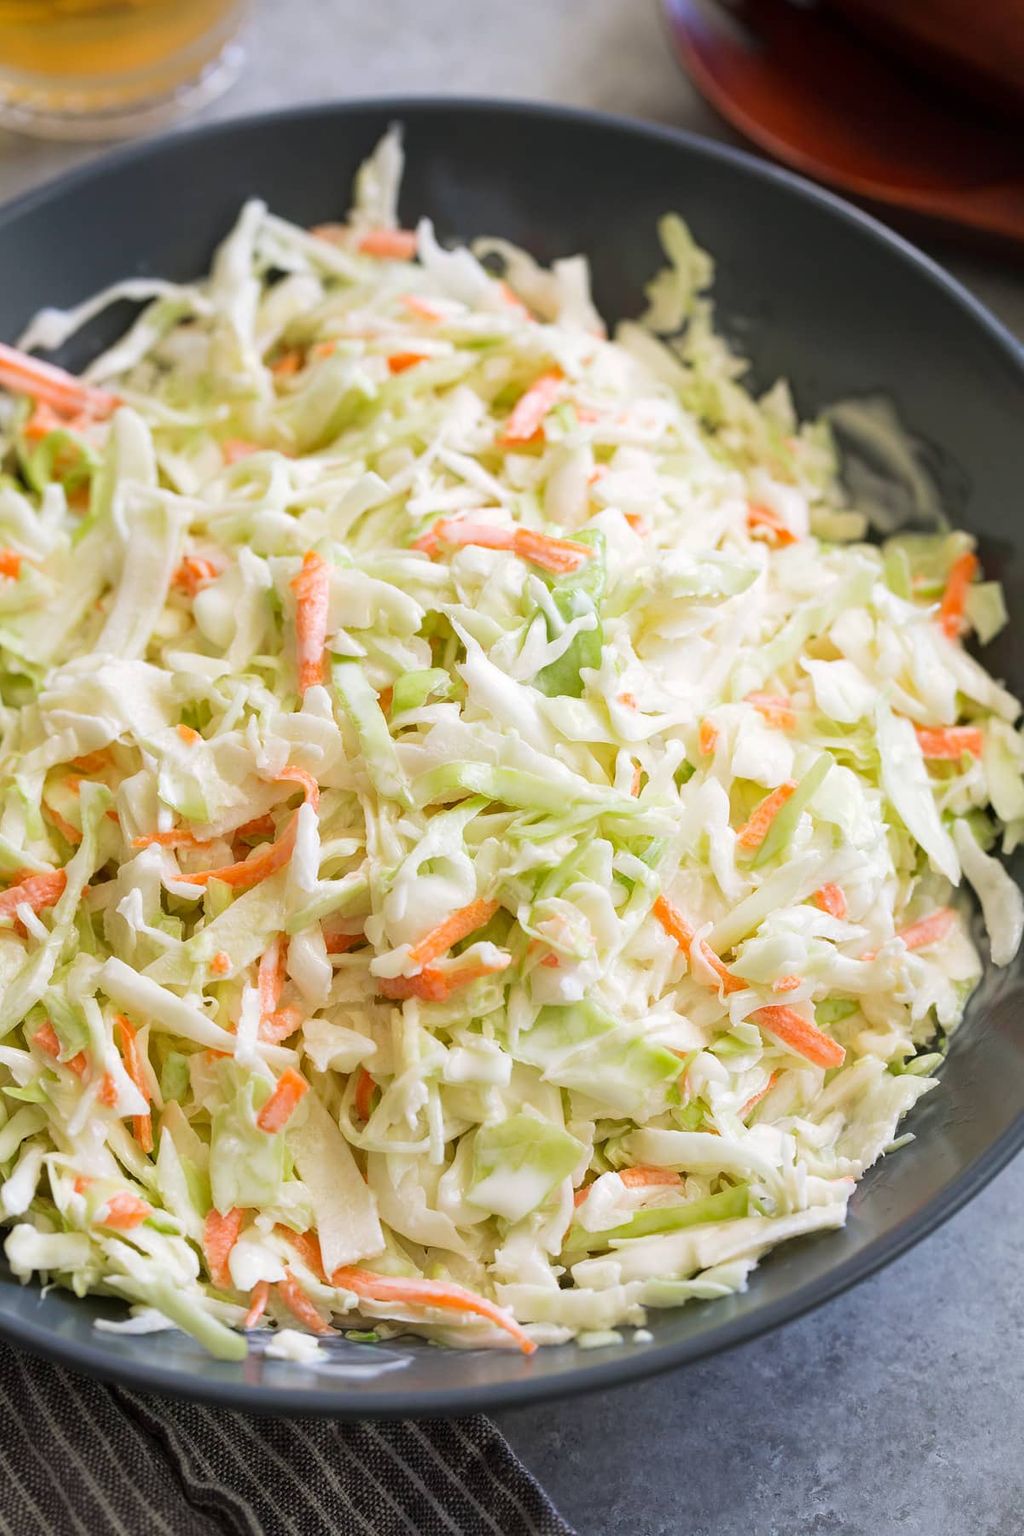 10 Common Salads For A Healthy Lifestyle | Wrytin